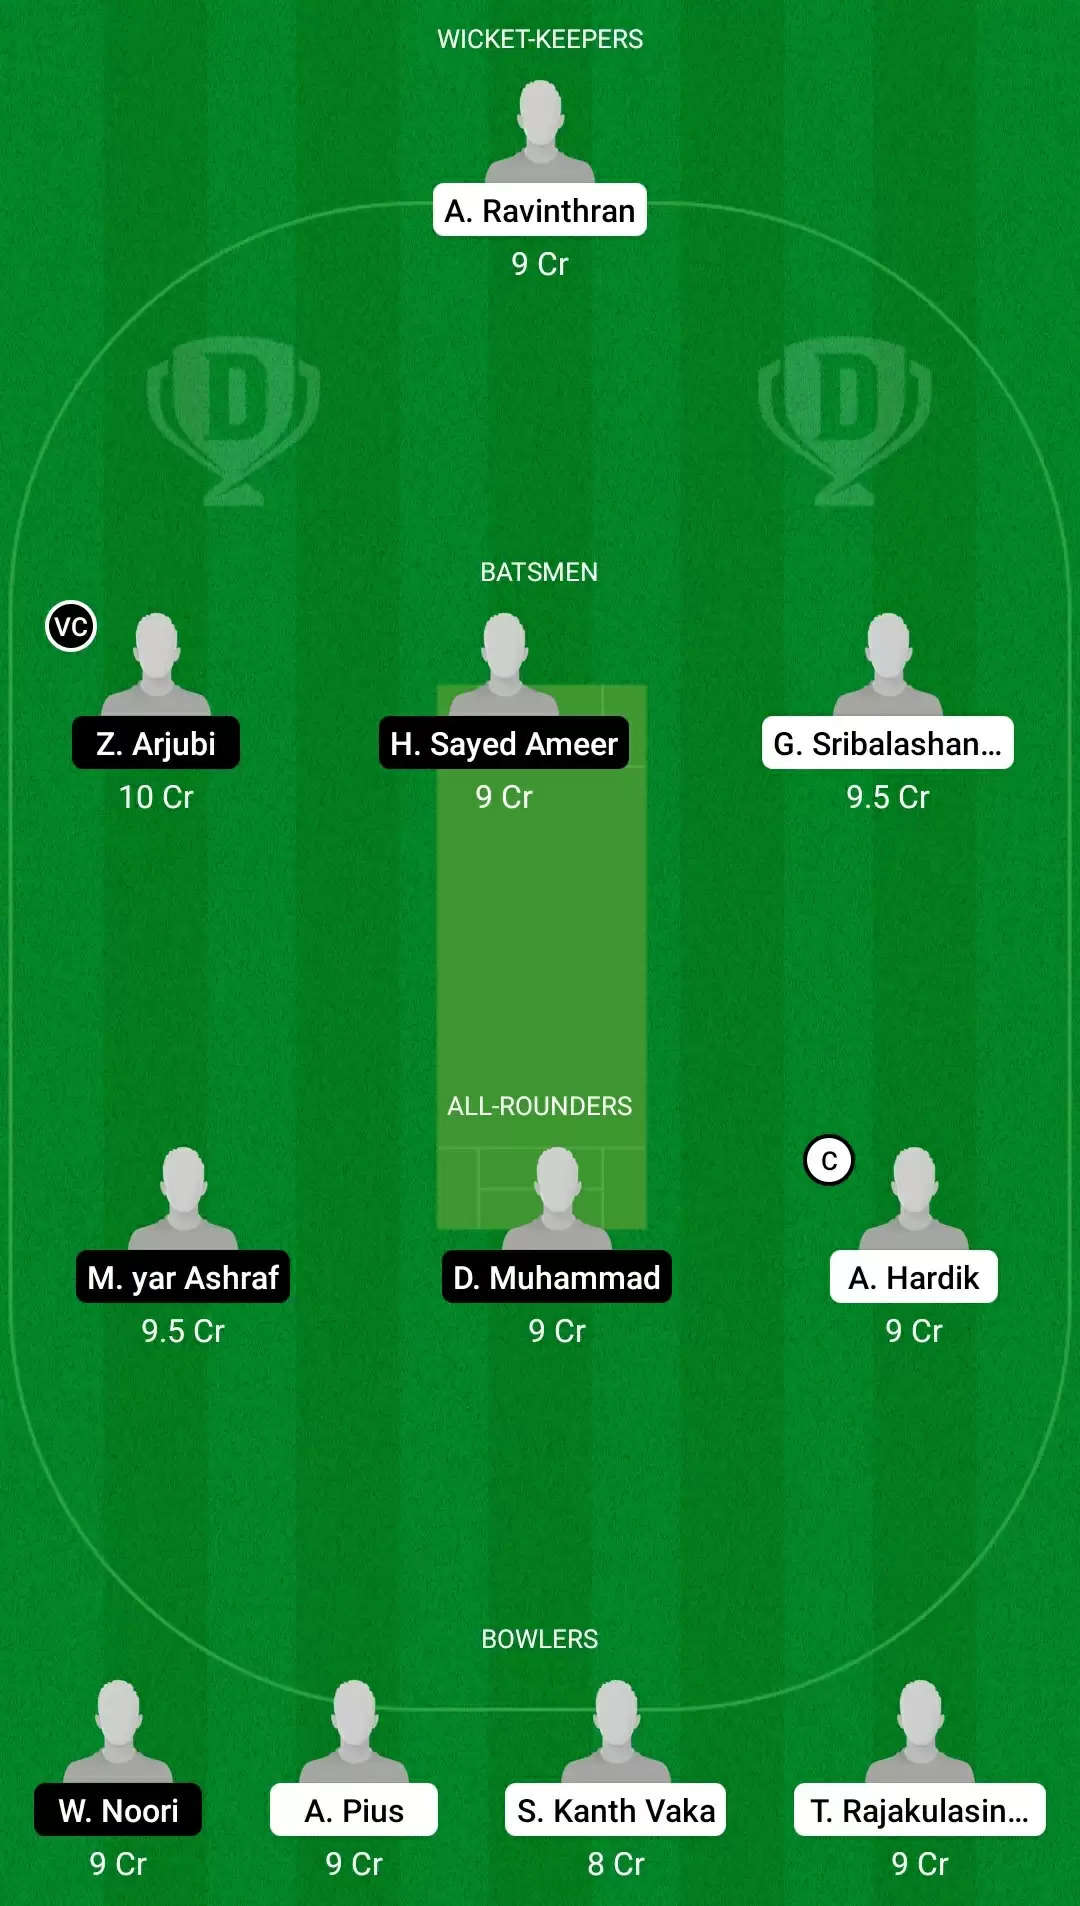 ECS Krefeld T10 2021, Match 3: BUB vs MSF Dream11 Prediction, Fantasy Cricket Tips, Team, Playing 11, Pitch Report, Weather Conditions and Injury Update